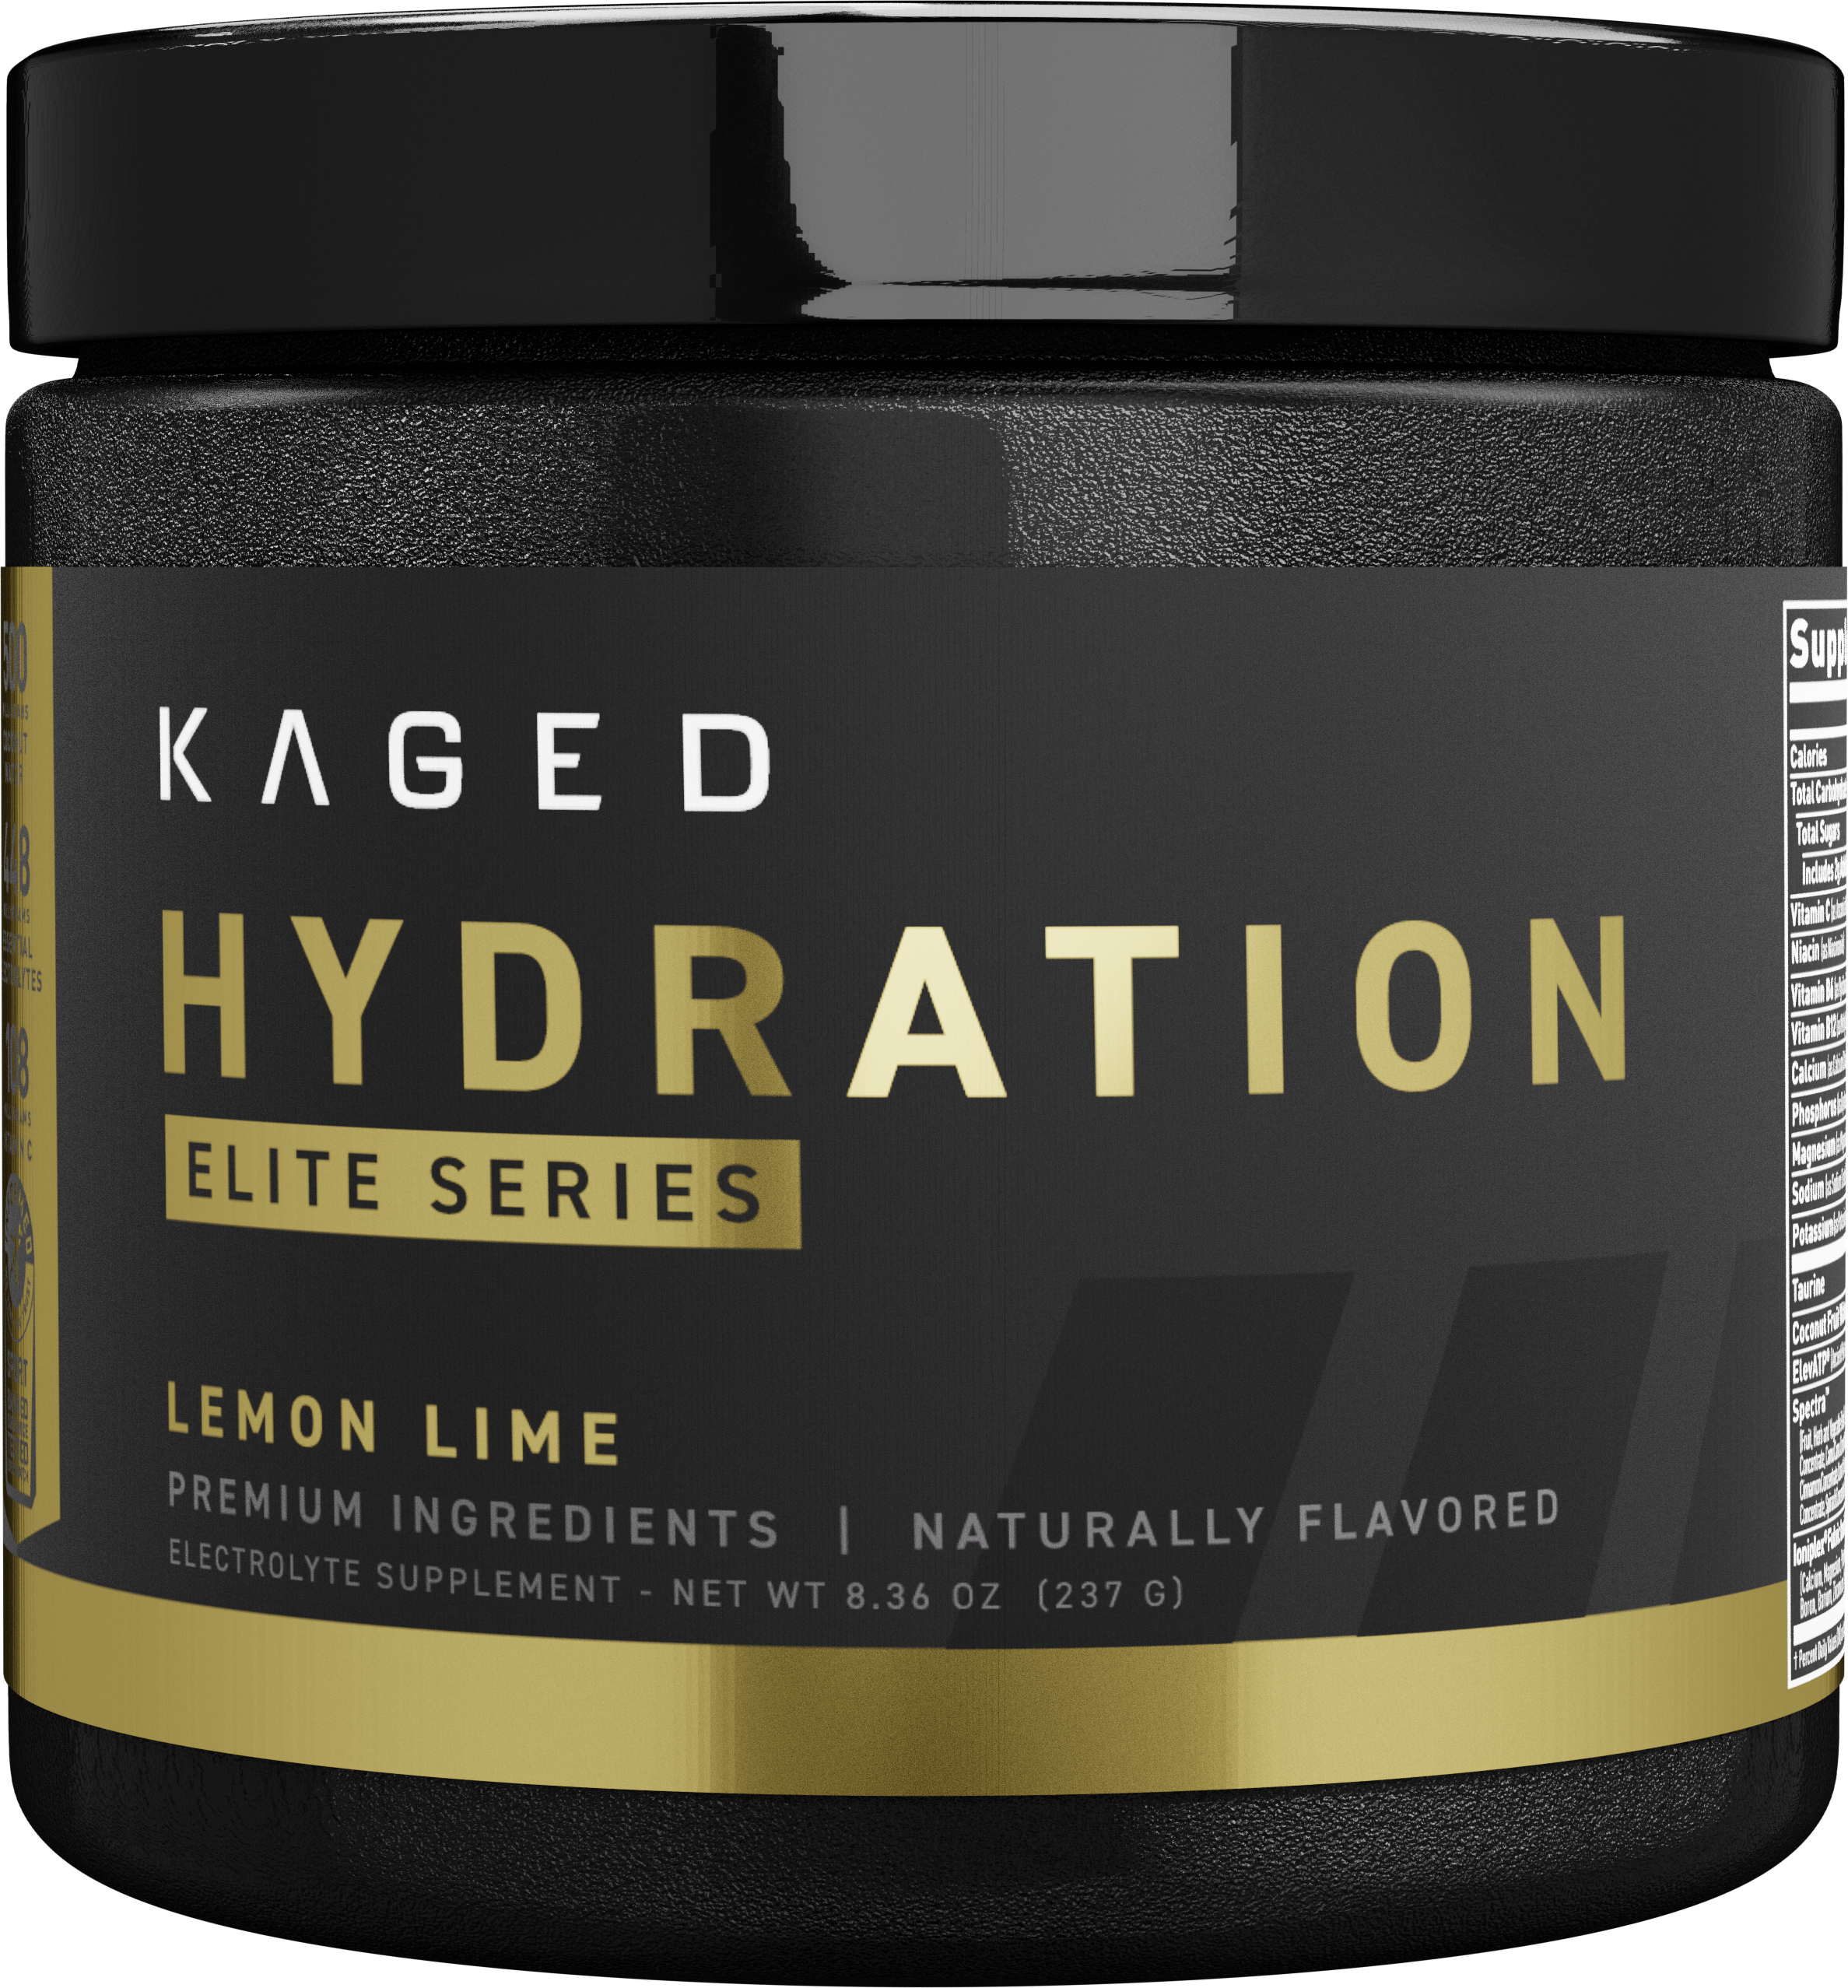 https://www.priceplow.com/static/images/products/kaged-hydration-elite-series.png